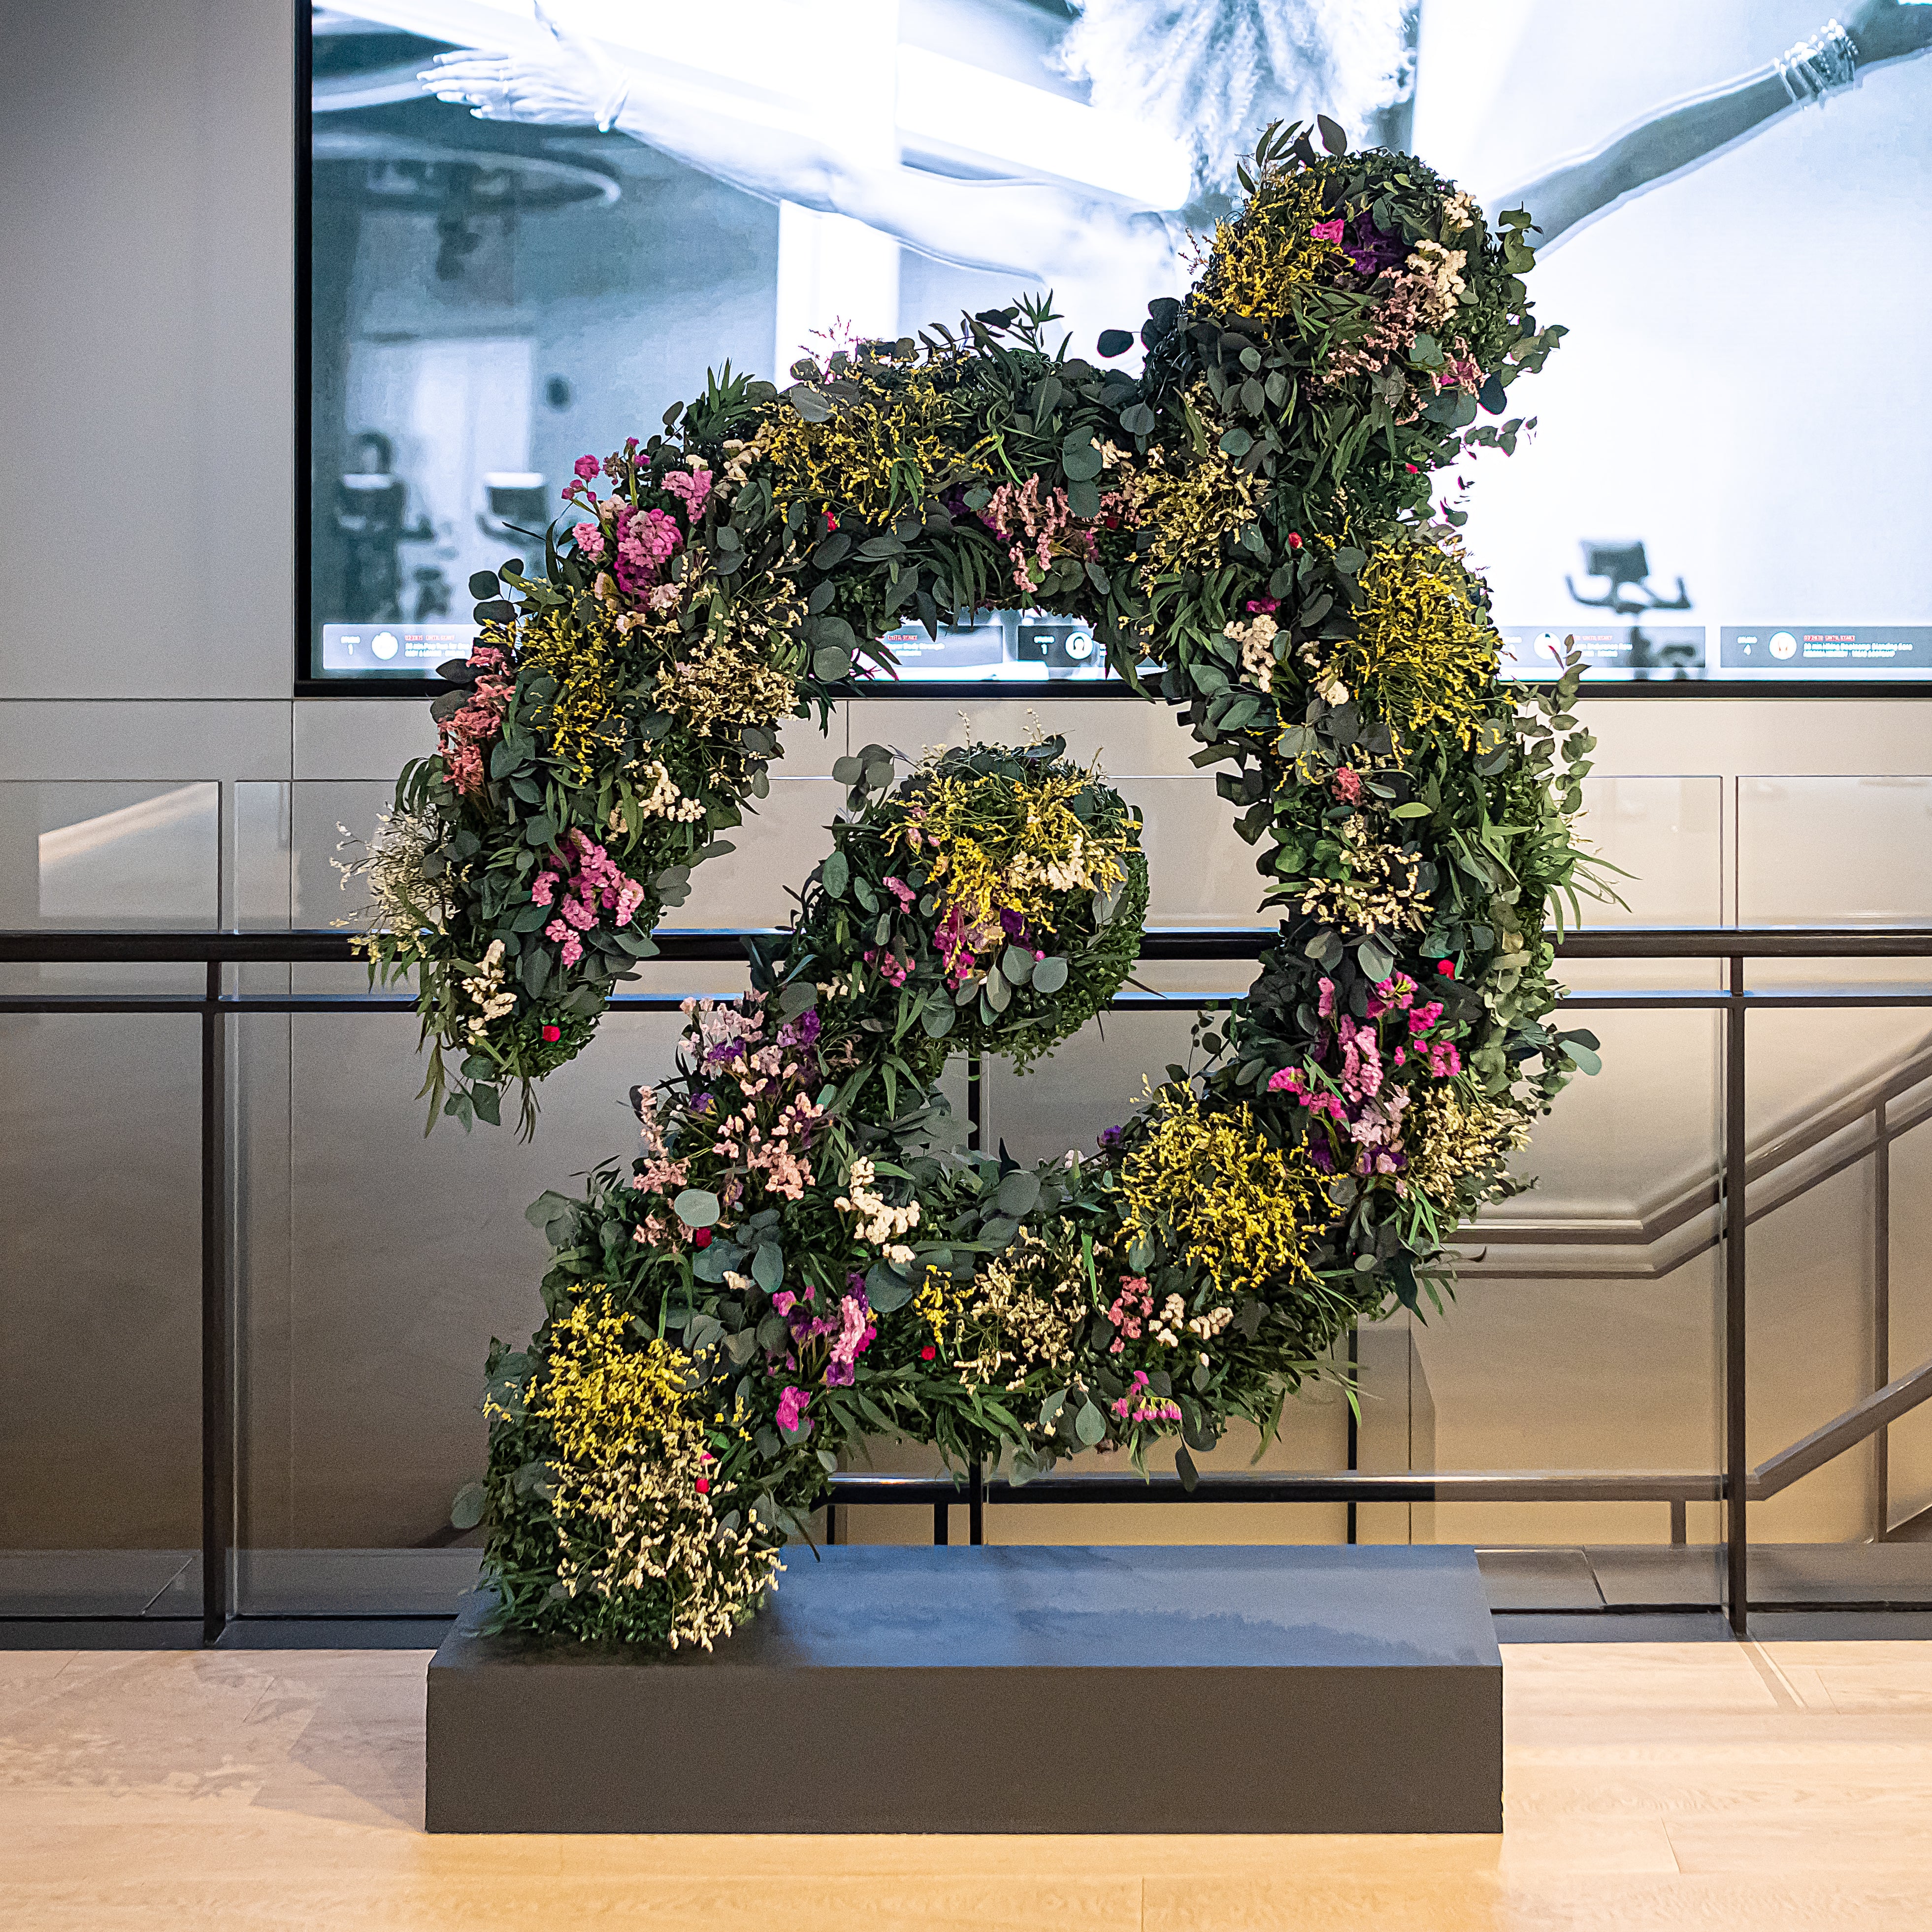 For Peloton we created a bespoke floral installation made in the shape of their distinctive logo, using only sustainable fresh and forever flowers.